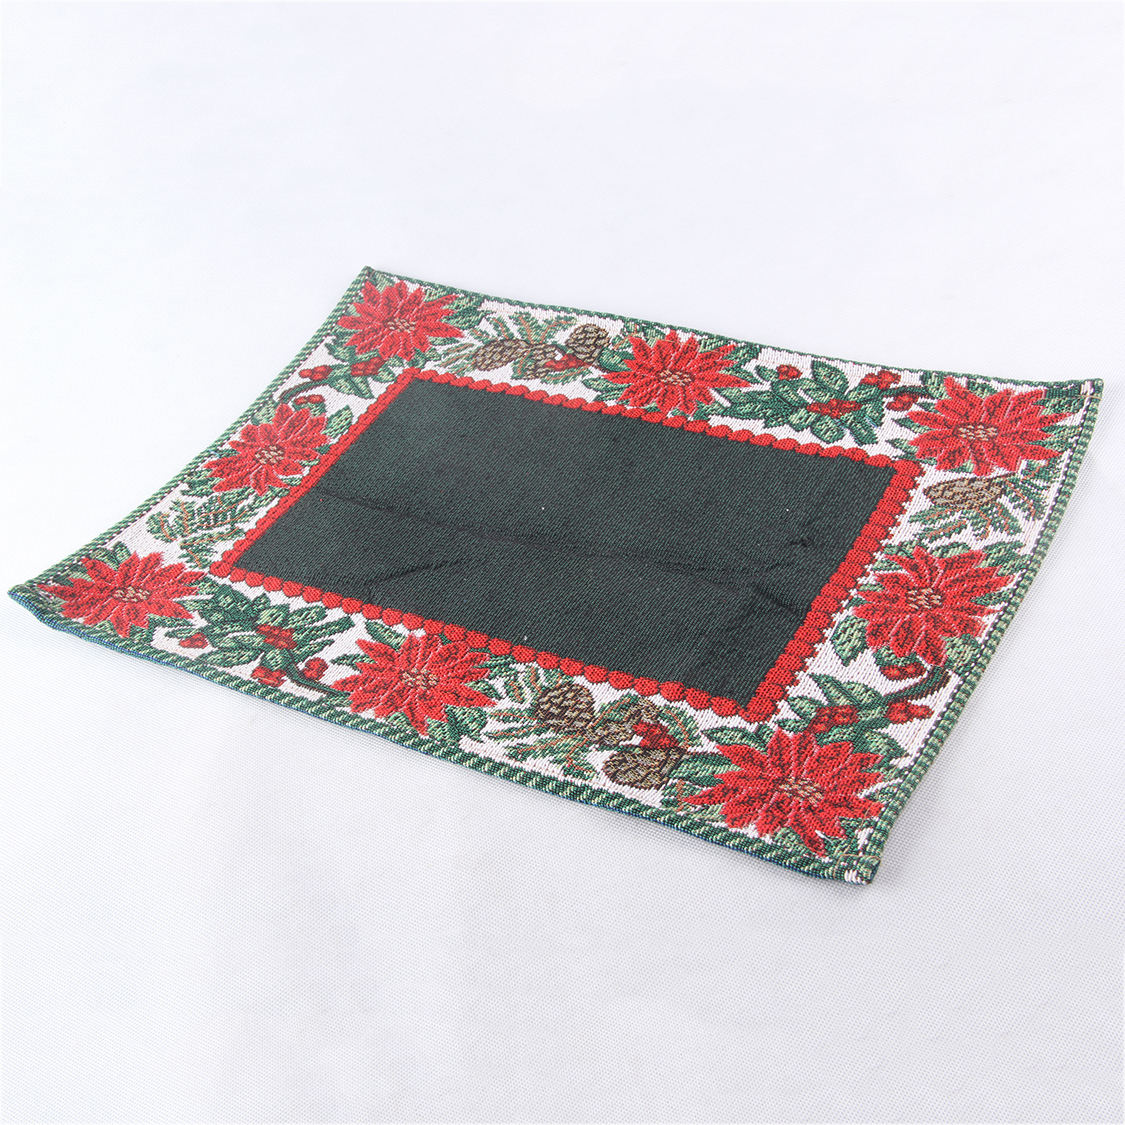 Royalunion New Type Top Sale Polyester Cotton Table Placemat, Placemat Plate A011183